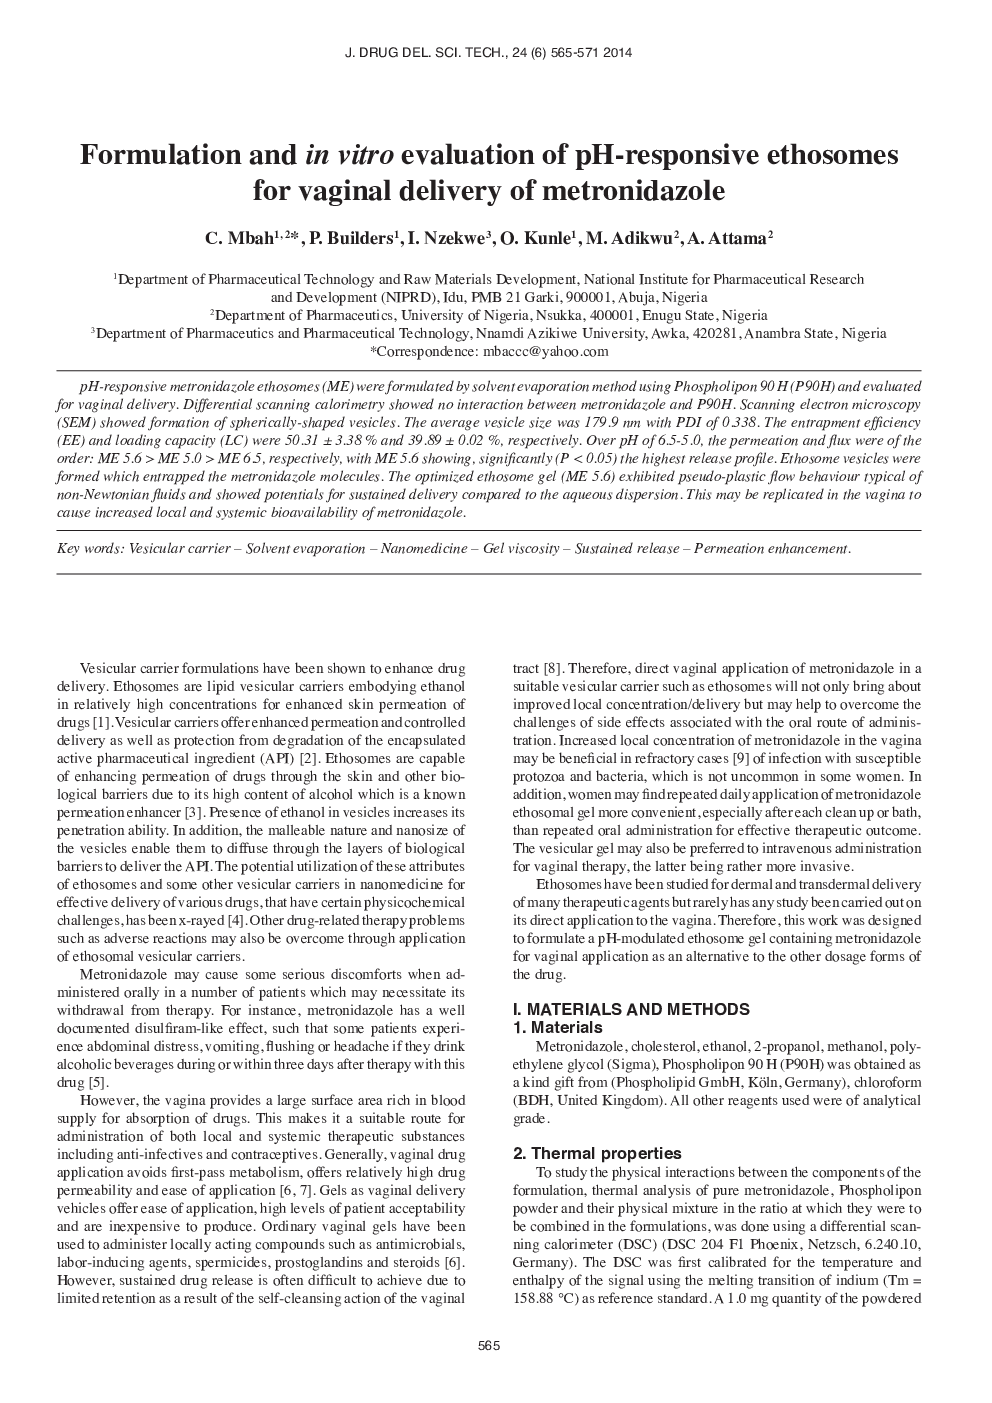 Formulation and in vitro evaluation of pH-responsive ethosomes for vaginal delivery of metronidazole